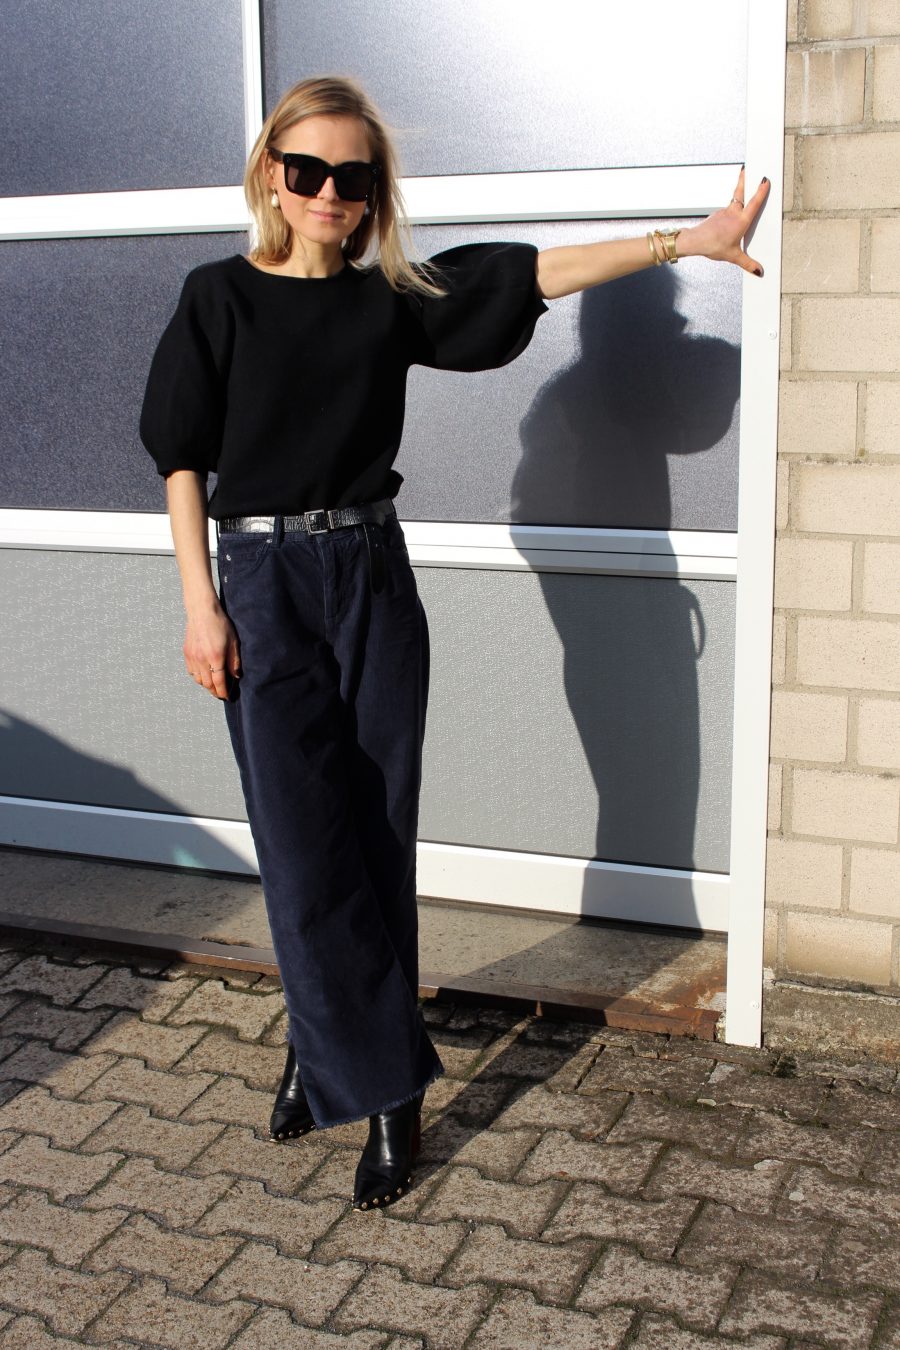 The Cord Trousers fashion blogger